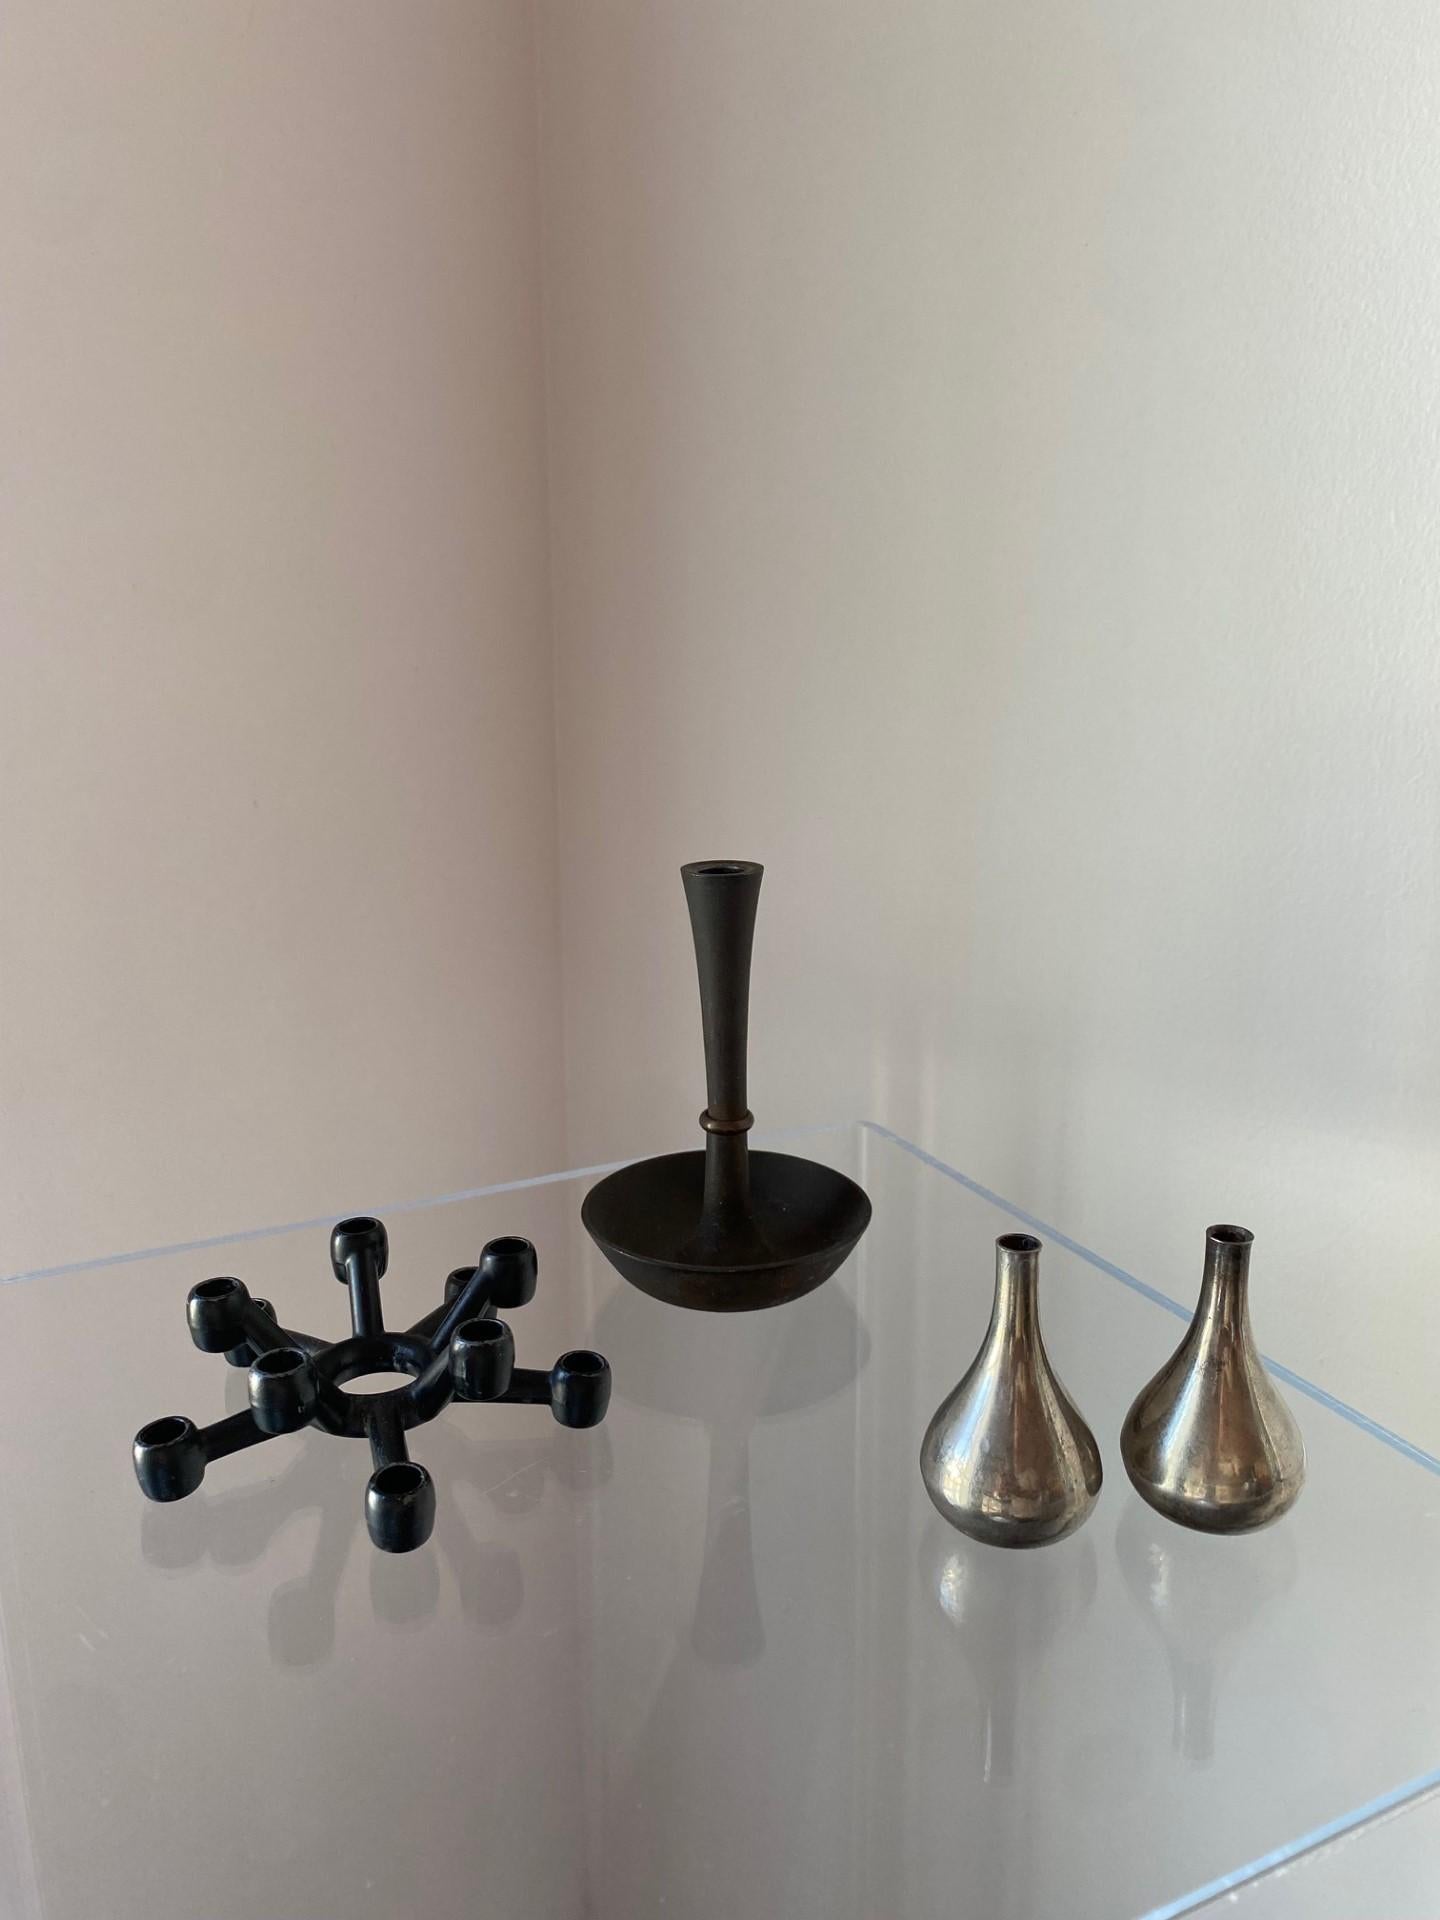 An array of incredible Scandinavian classic candle holders from Dansk.  This set includes a spider candle holder, an Iron and Brass candle holder and two teardrop candle holders (4 pieces total). Incredible designs from Dansk and Jens